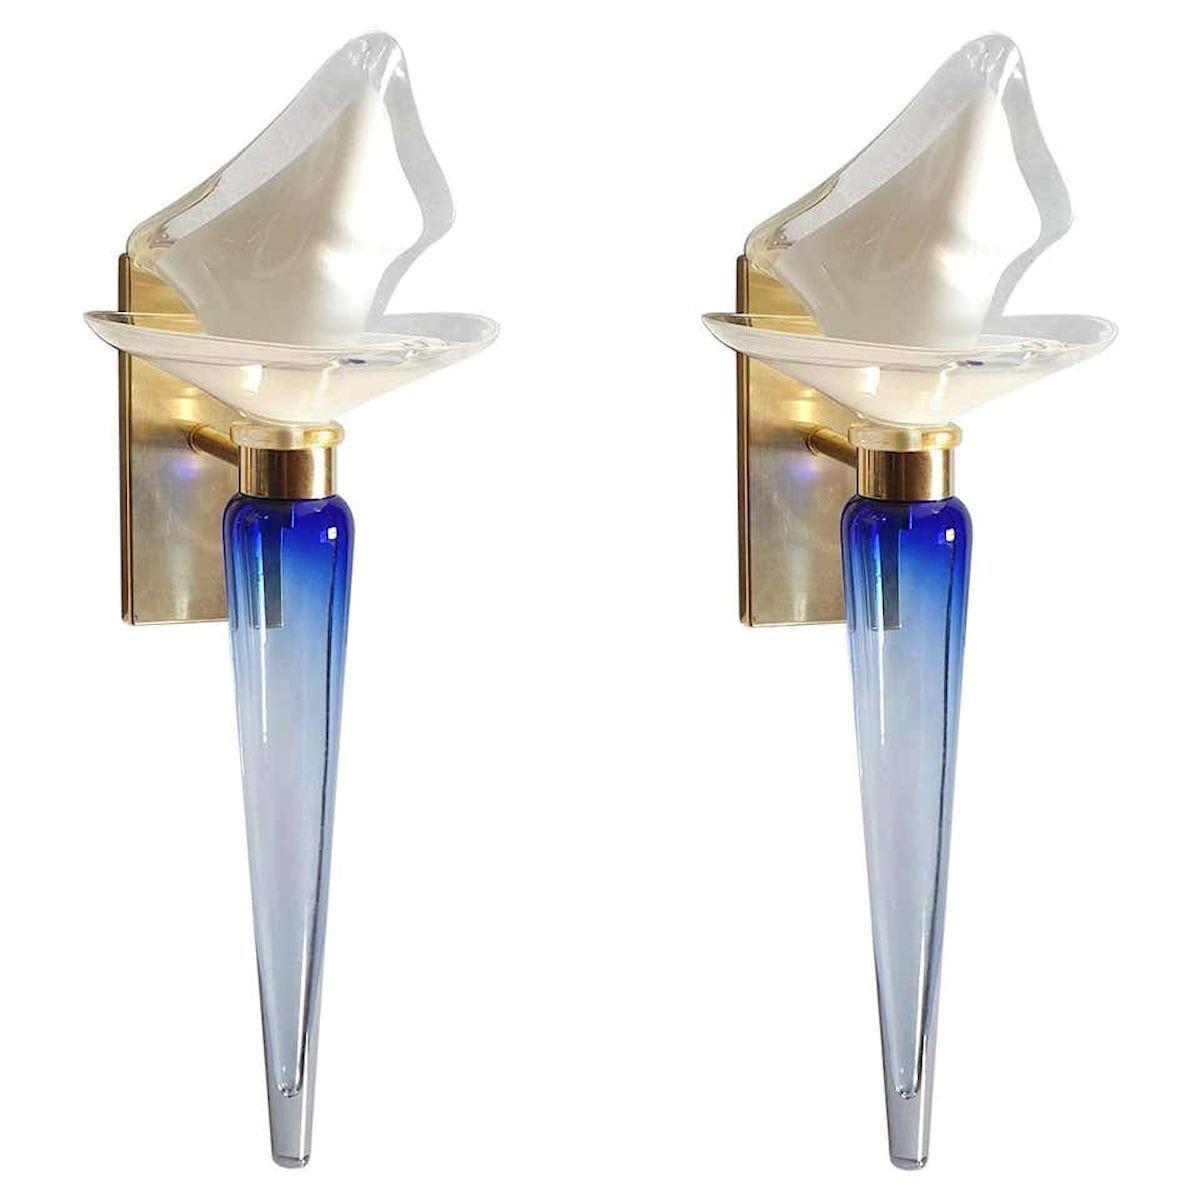 Pair of large Murano glass sconces, by Seguso